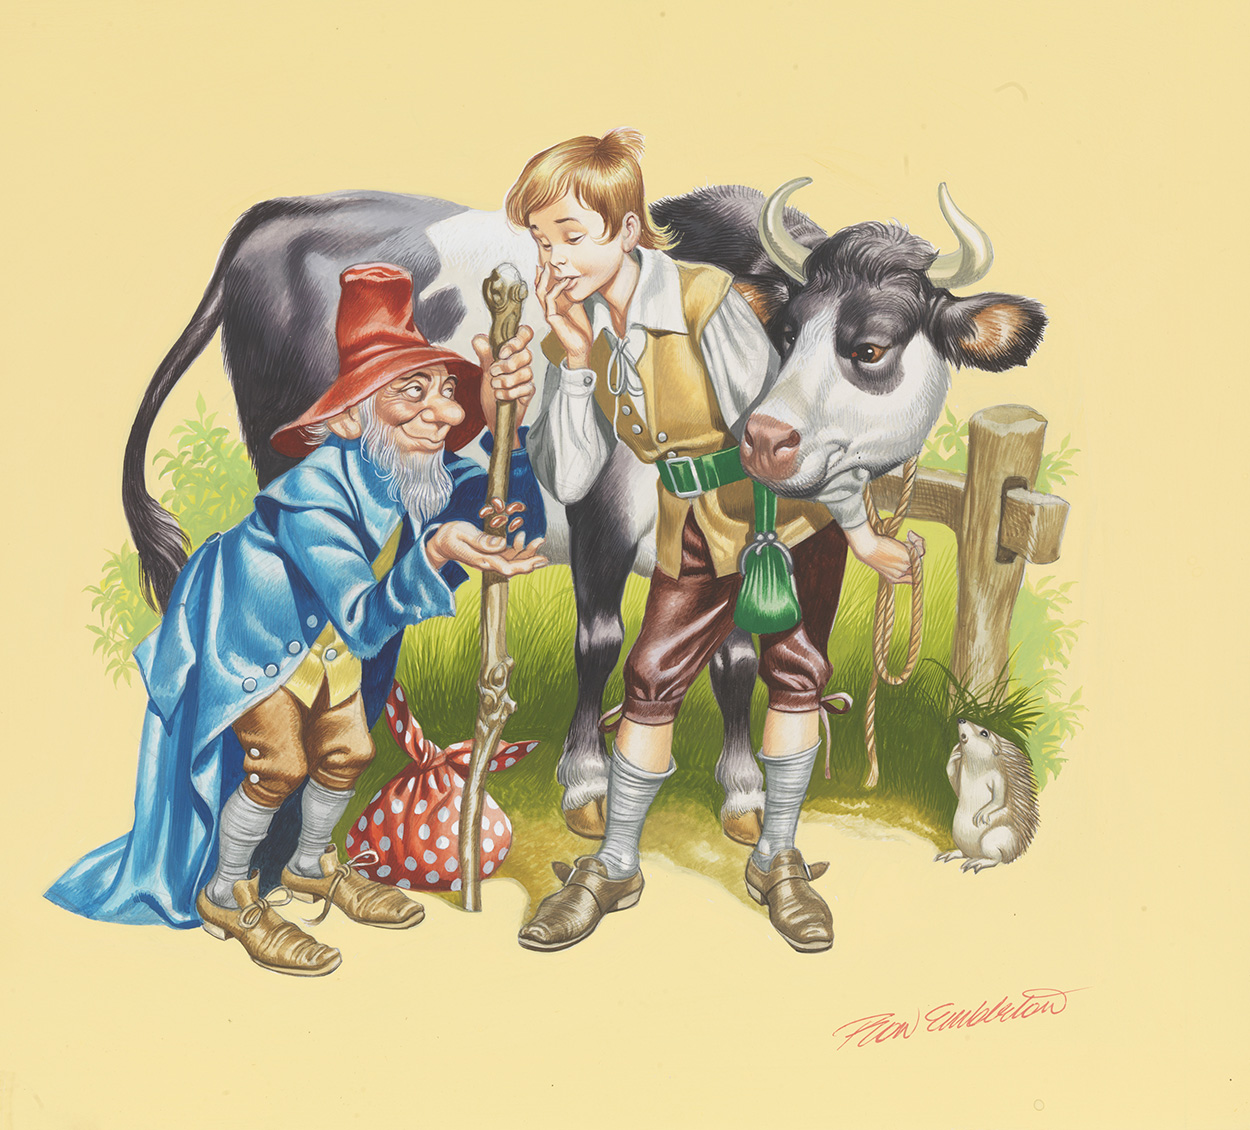 Jack and the Beanstalk - Jack sells his cow (Original) (Signed) art by Jack and the Beanstalk (Ron Embleton) at The Illustration Art Gallery